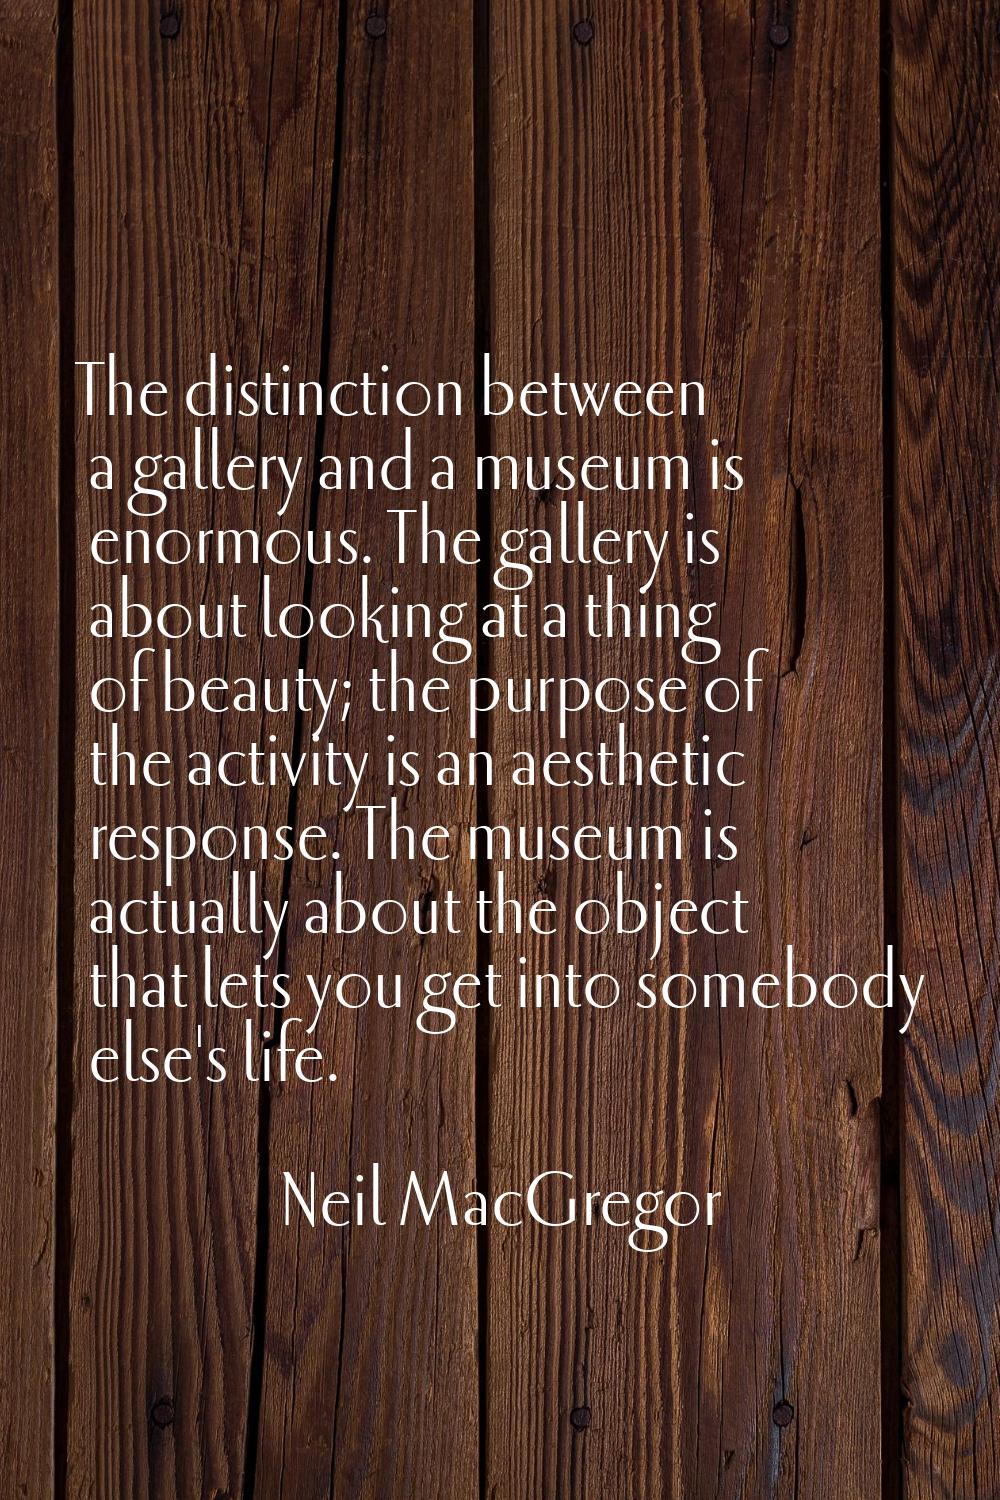 The distinction between a gallery and a museum is enormous. The gallery is about looking at a thing